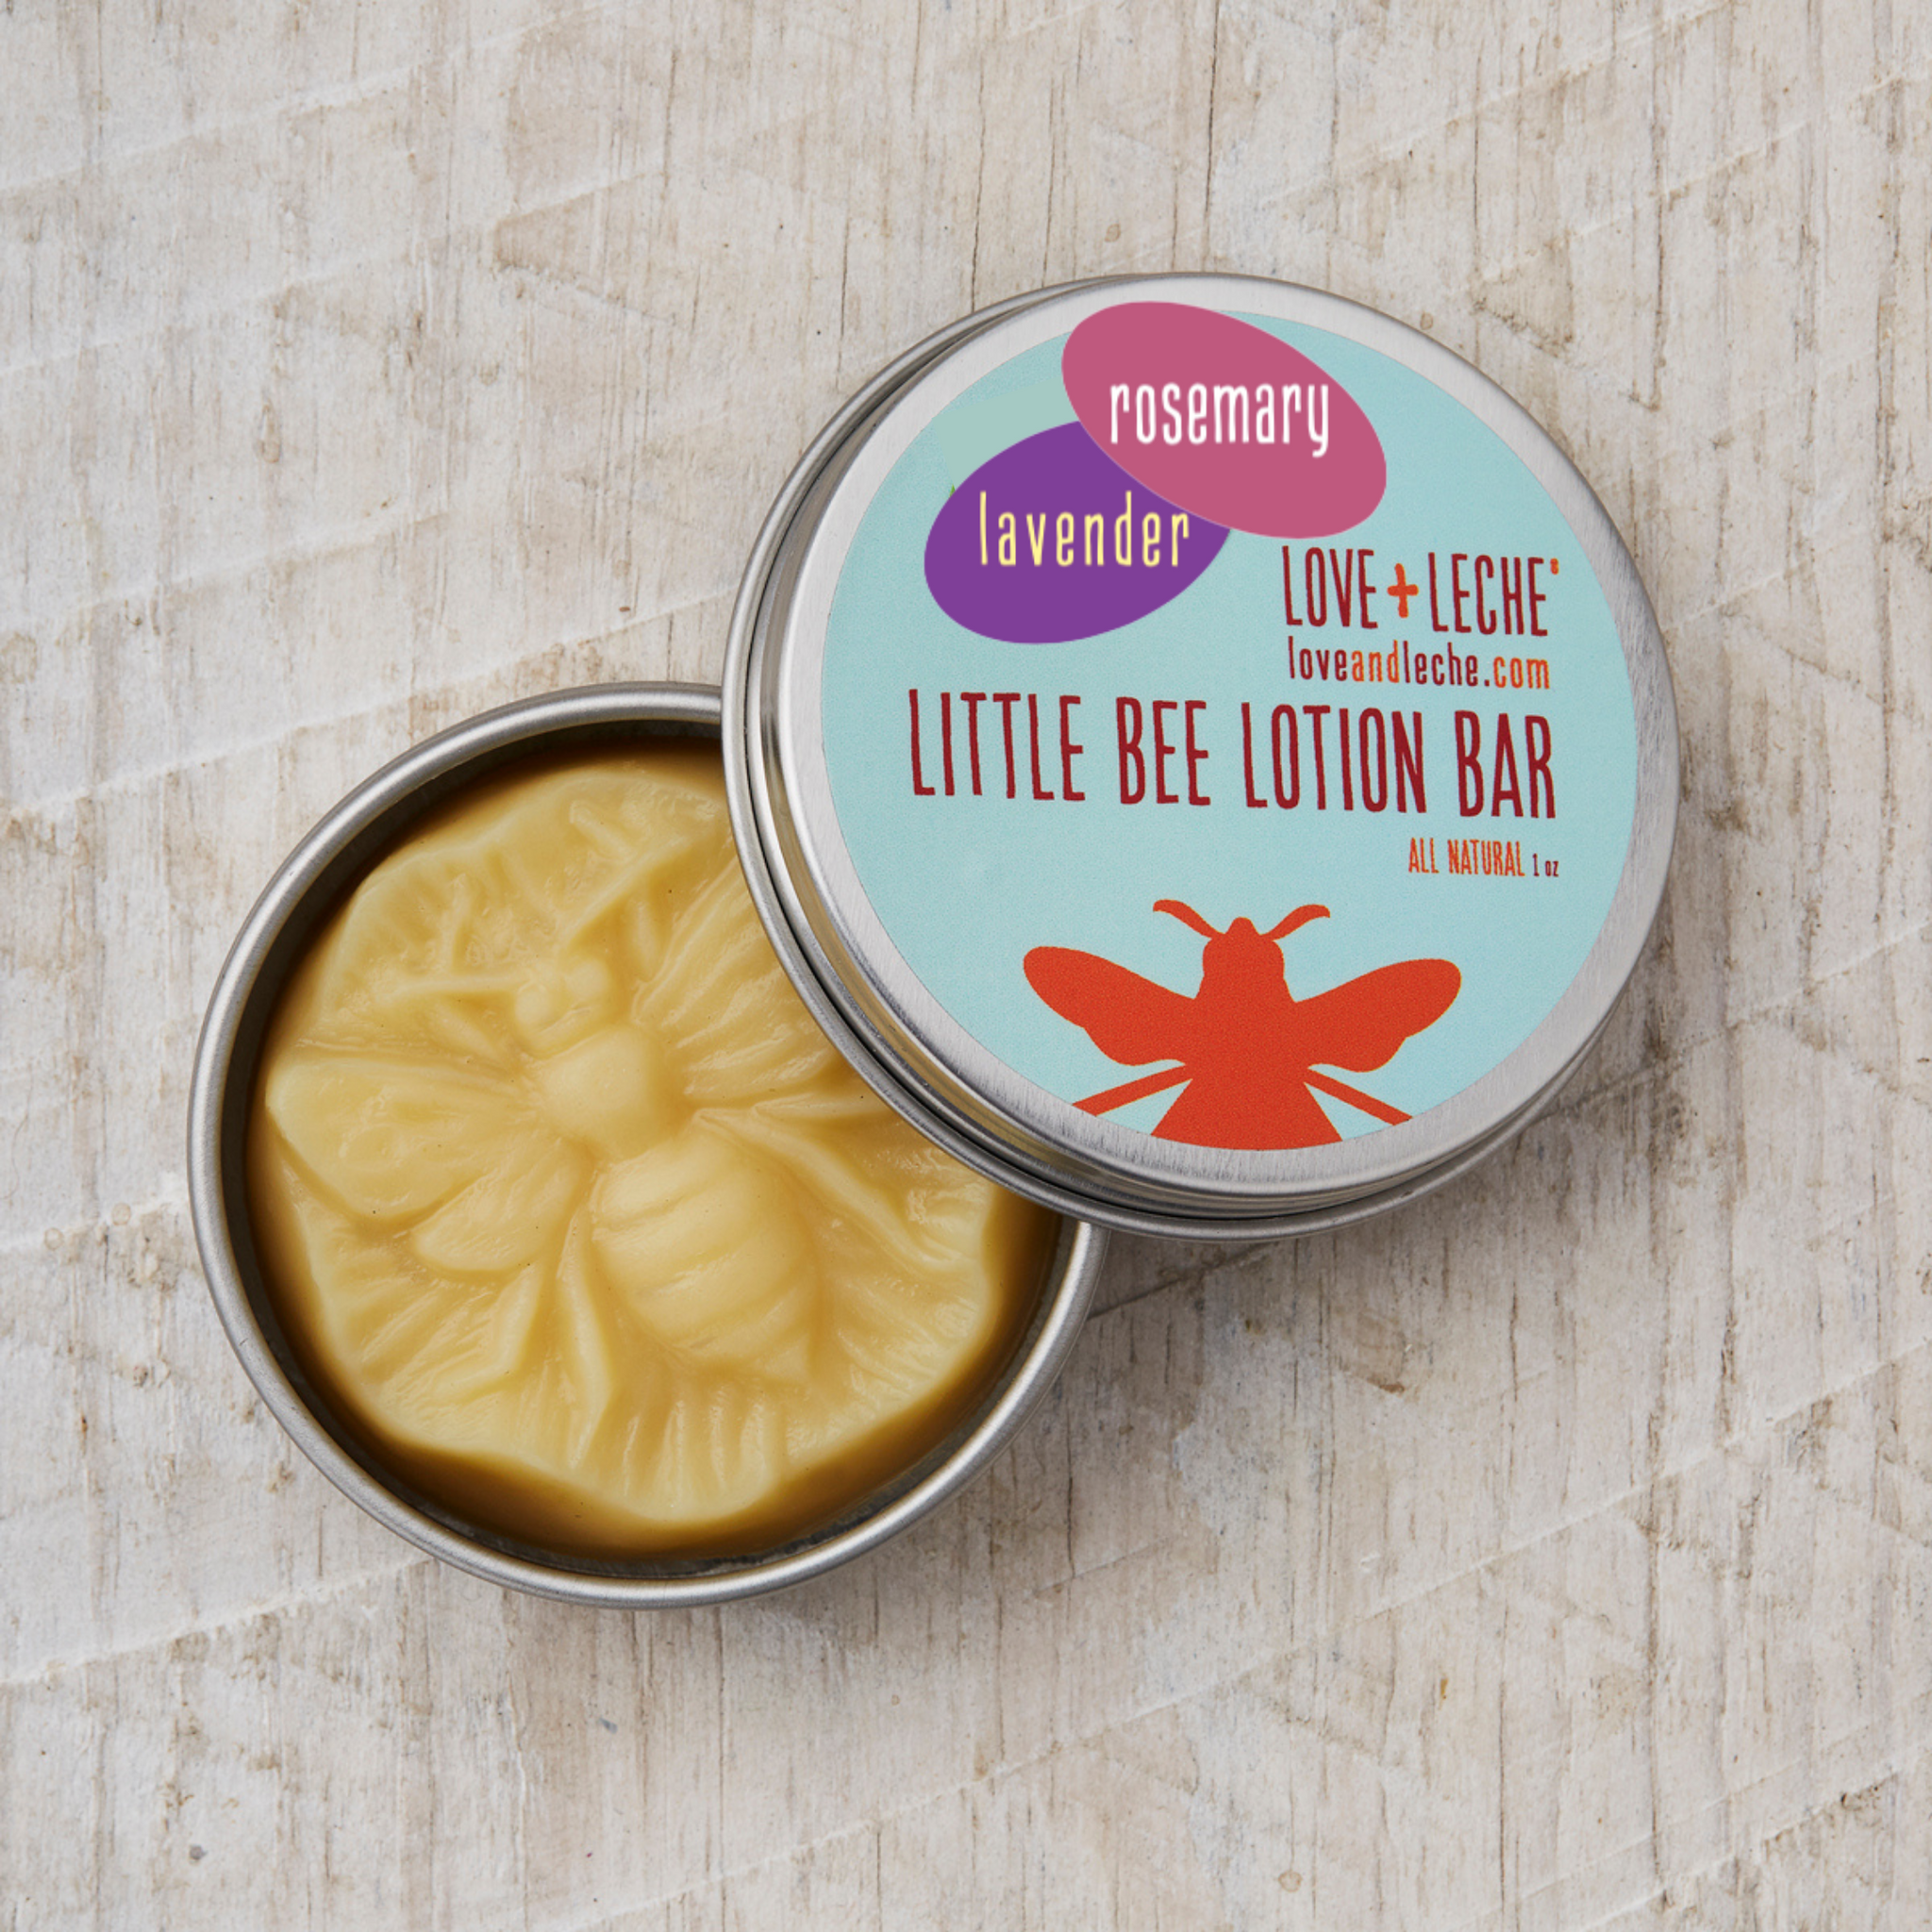 Lavender Rosemary - Little Bee Lotion Bar